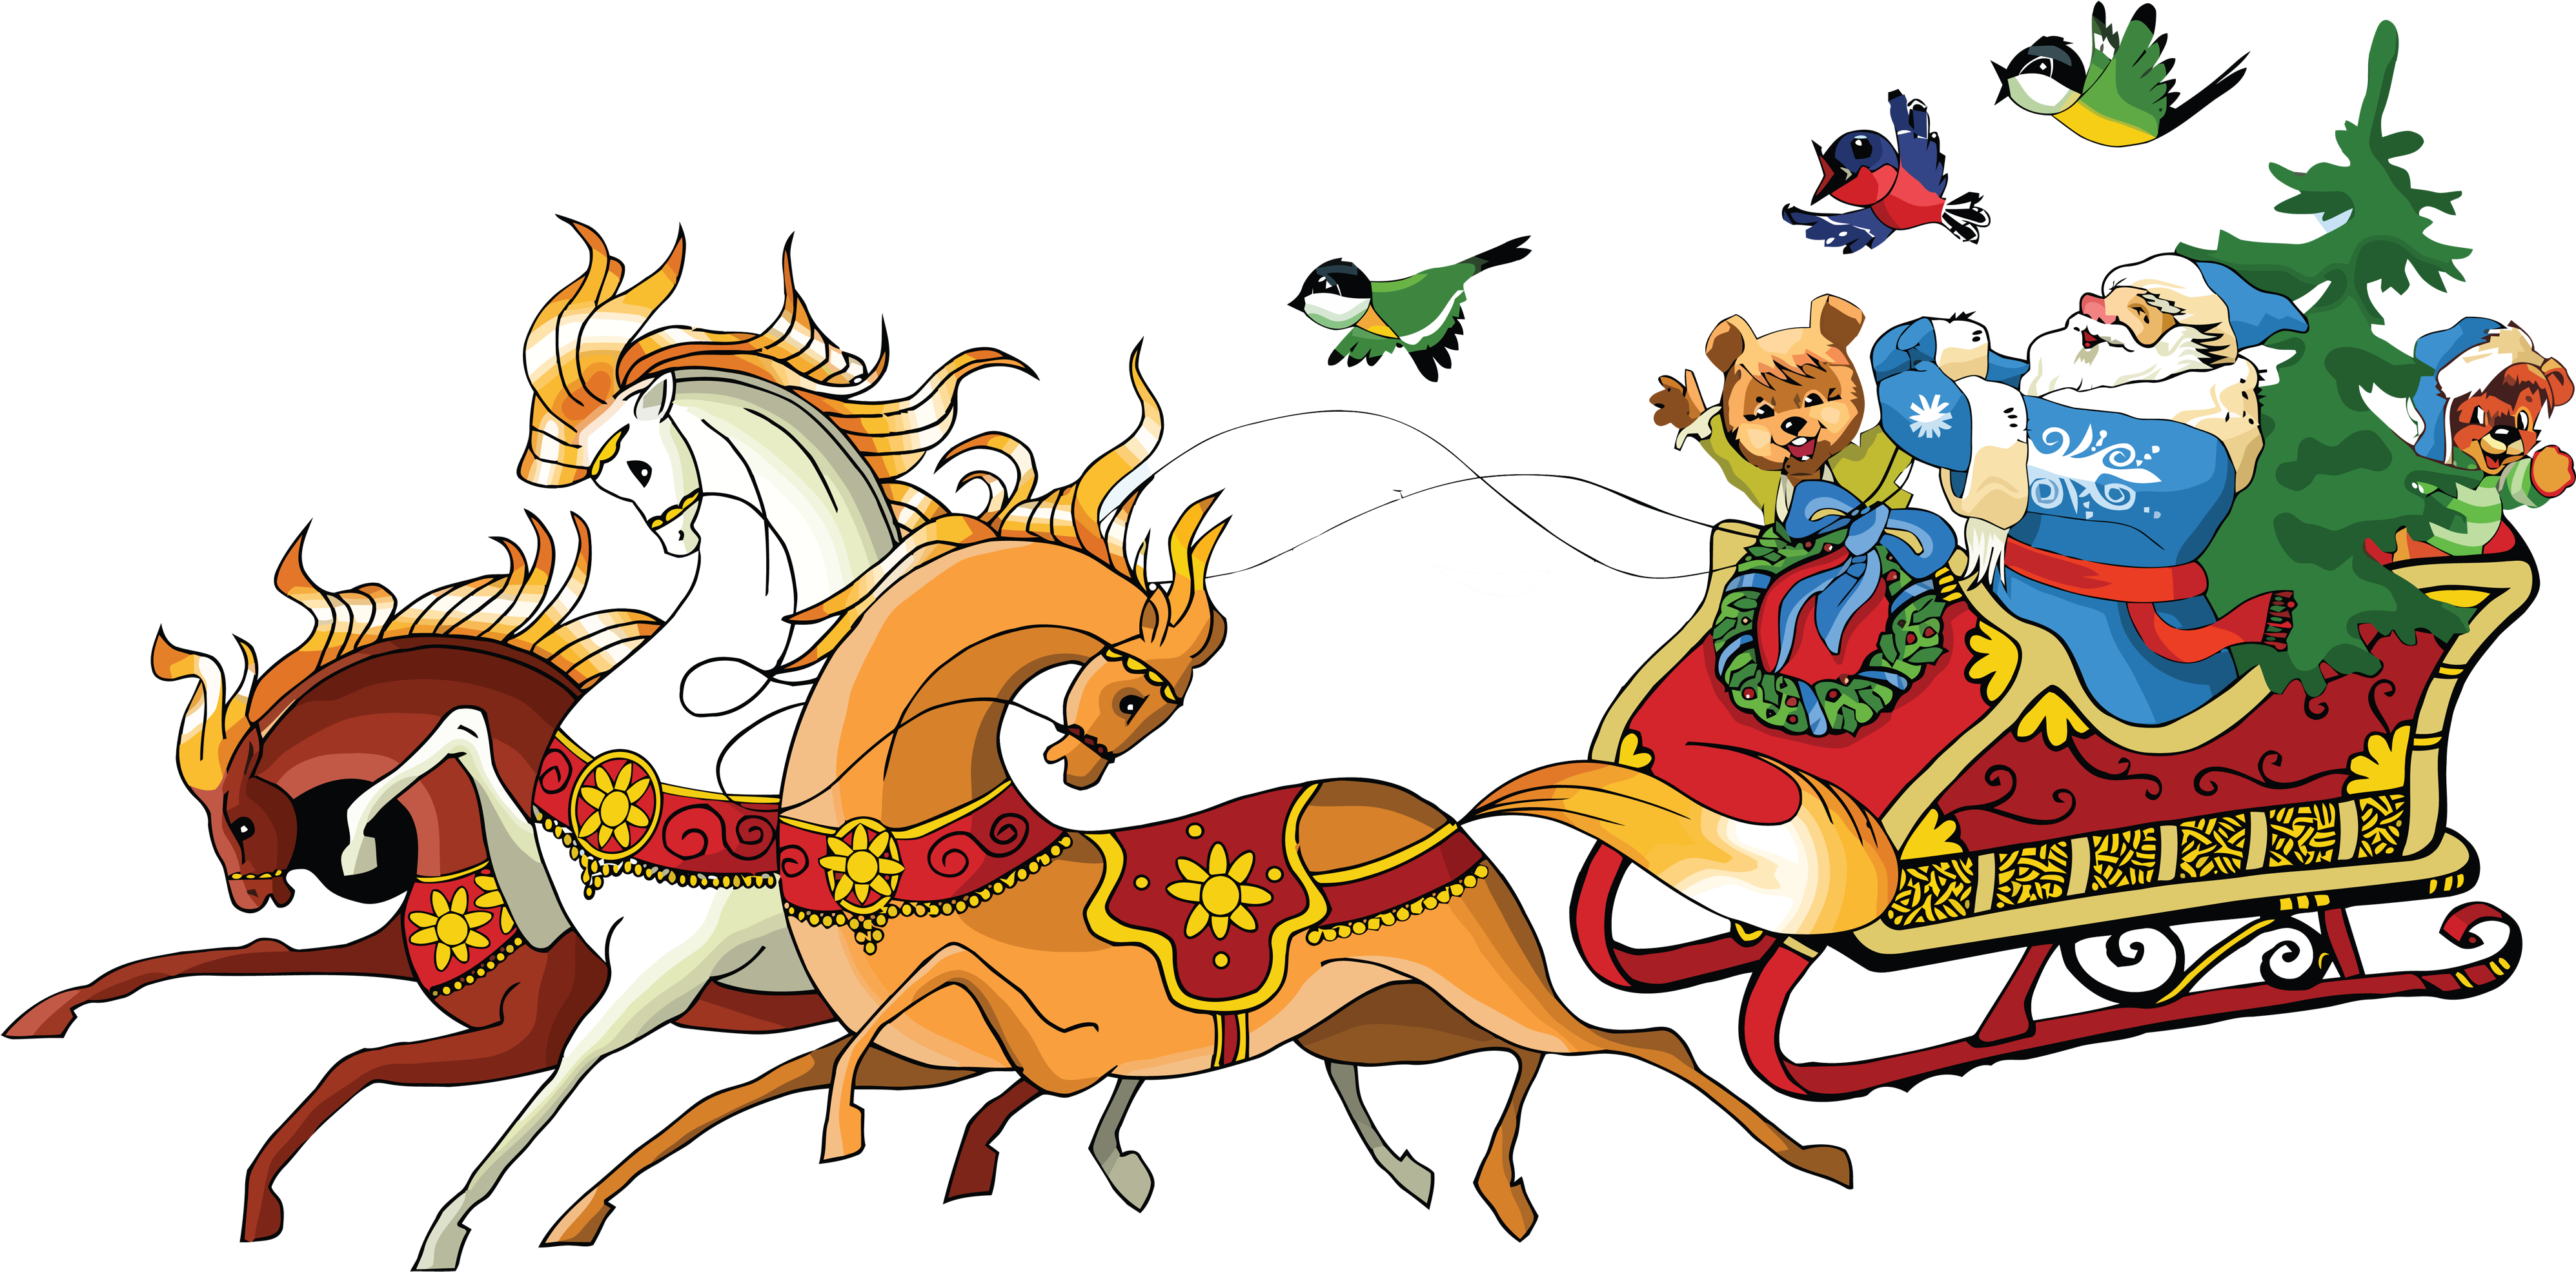 santa sleigh png image collection for download crazypngm crazy png images download #30476